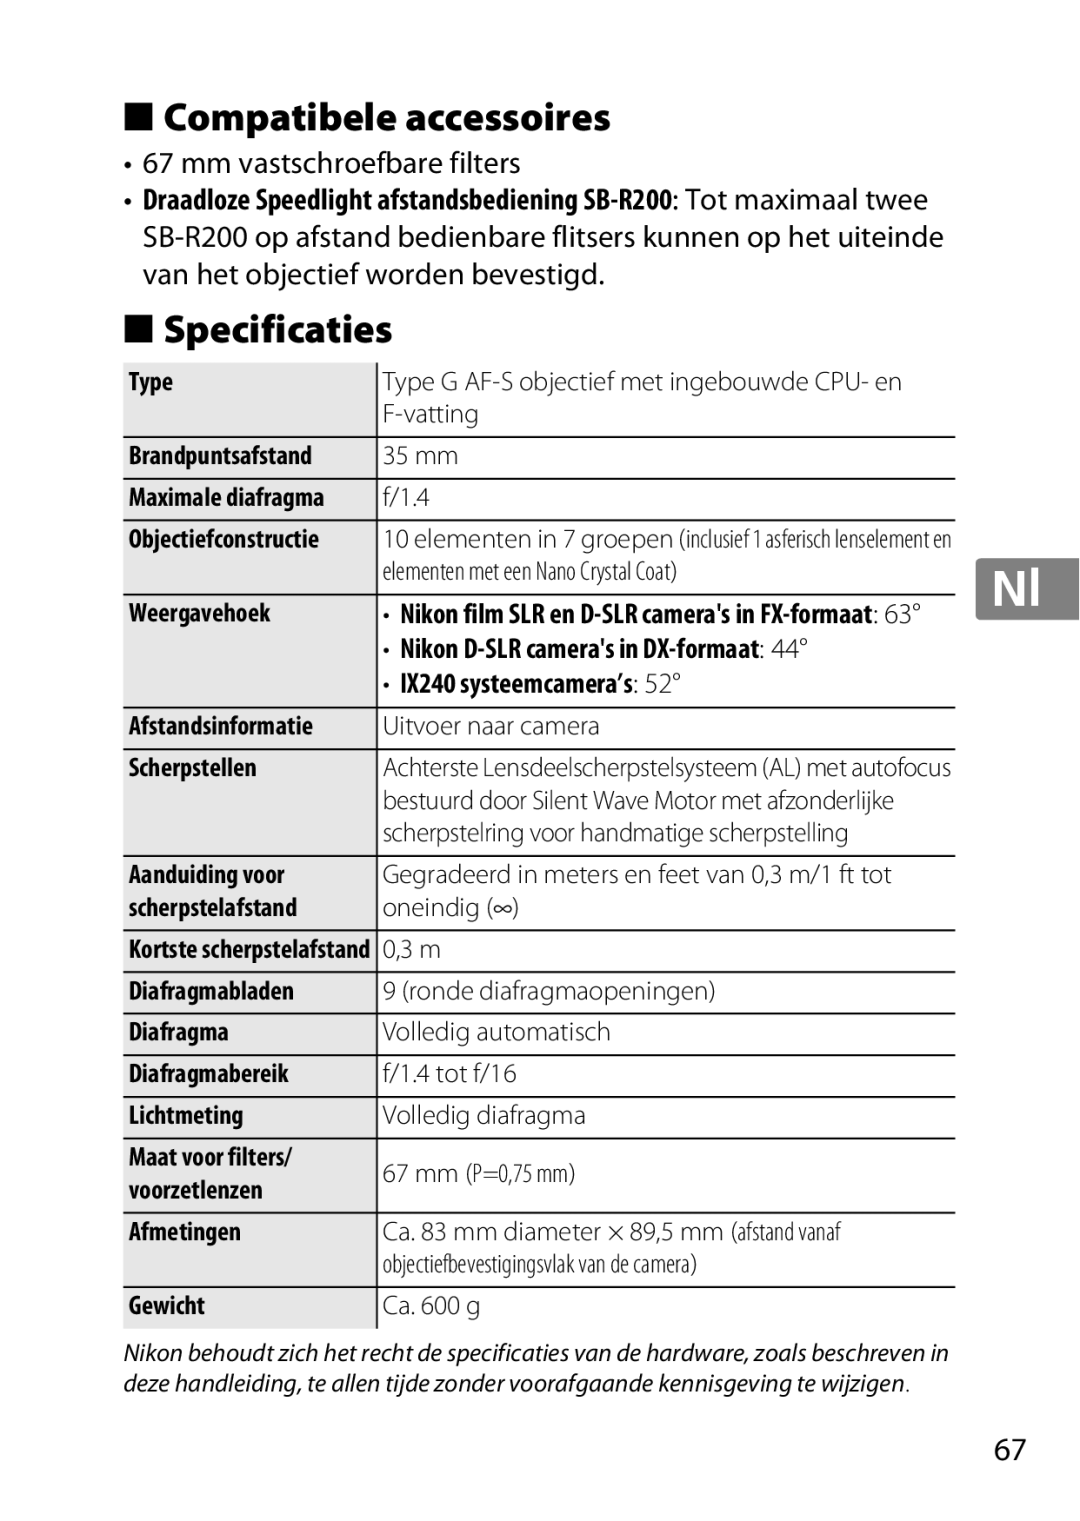 Nikon 2198, AF-S, 35mmf14G, 35mm f/1.4G user manual Compatibele accessoires, Specificaties, • IX240 systeemcamera’s 